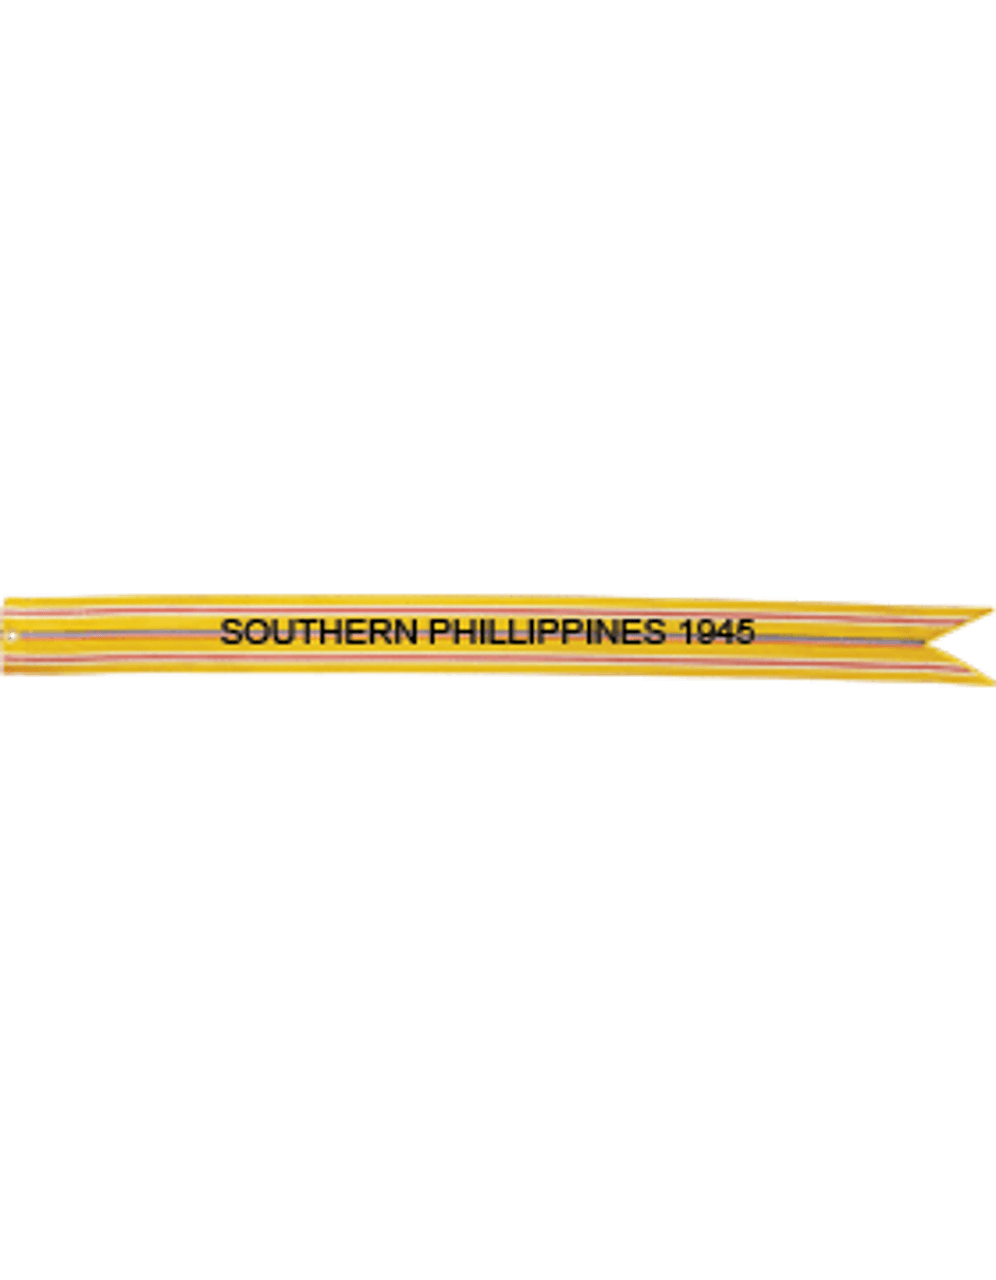 US Air Force Battle Streamer World War II, Asiatic Pacific Campaign SOUTHERN PHILIPPINES 1945